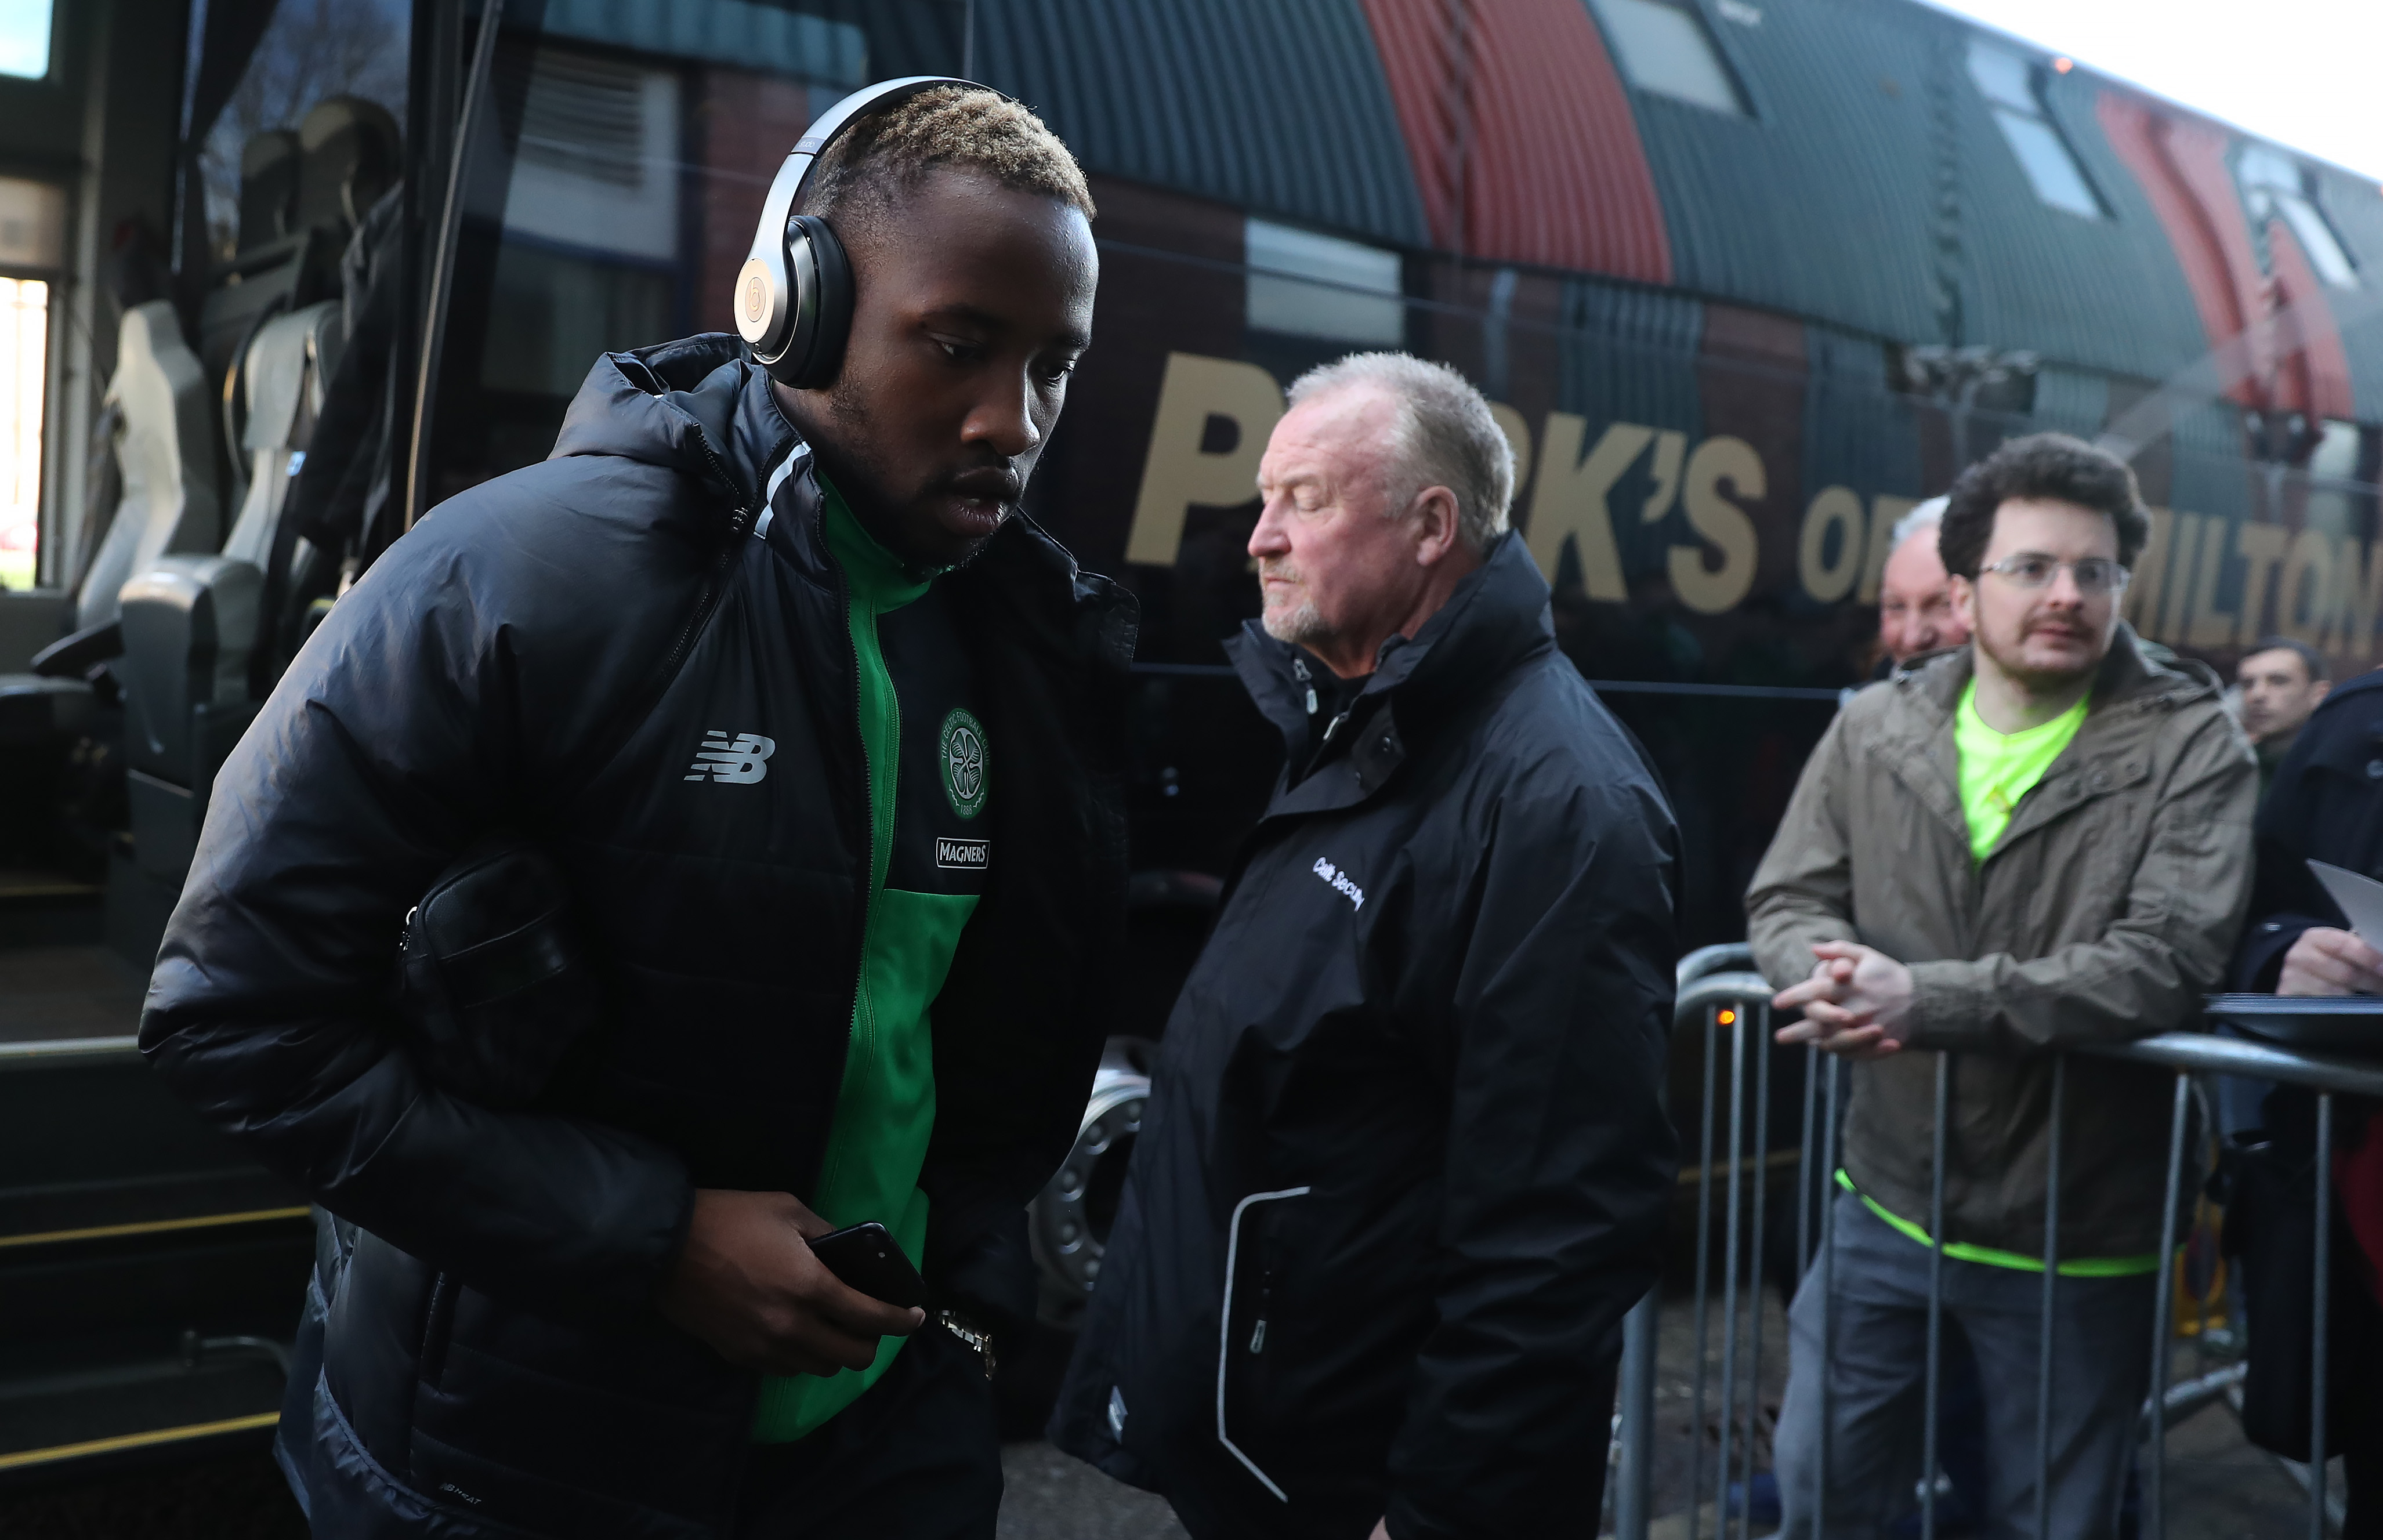 DUNDEE, SCOTLAND - MARCH 19:  Moussa Dembele of Celtic arrives at the stadium prior to the Ladbrokes Scottish Premiership match between Dundee and Celtic at Dens Park Stadium on March 19, 2017 in Dundee, Scotland. (Photo by Ian MacNicol/Getty Images)